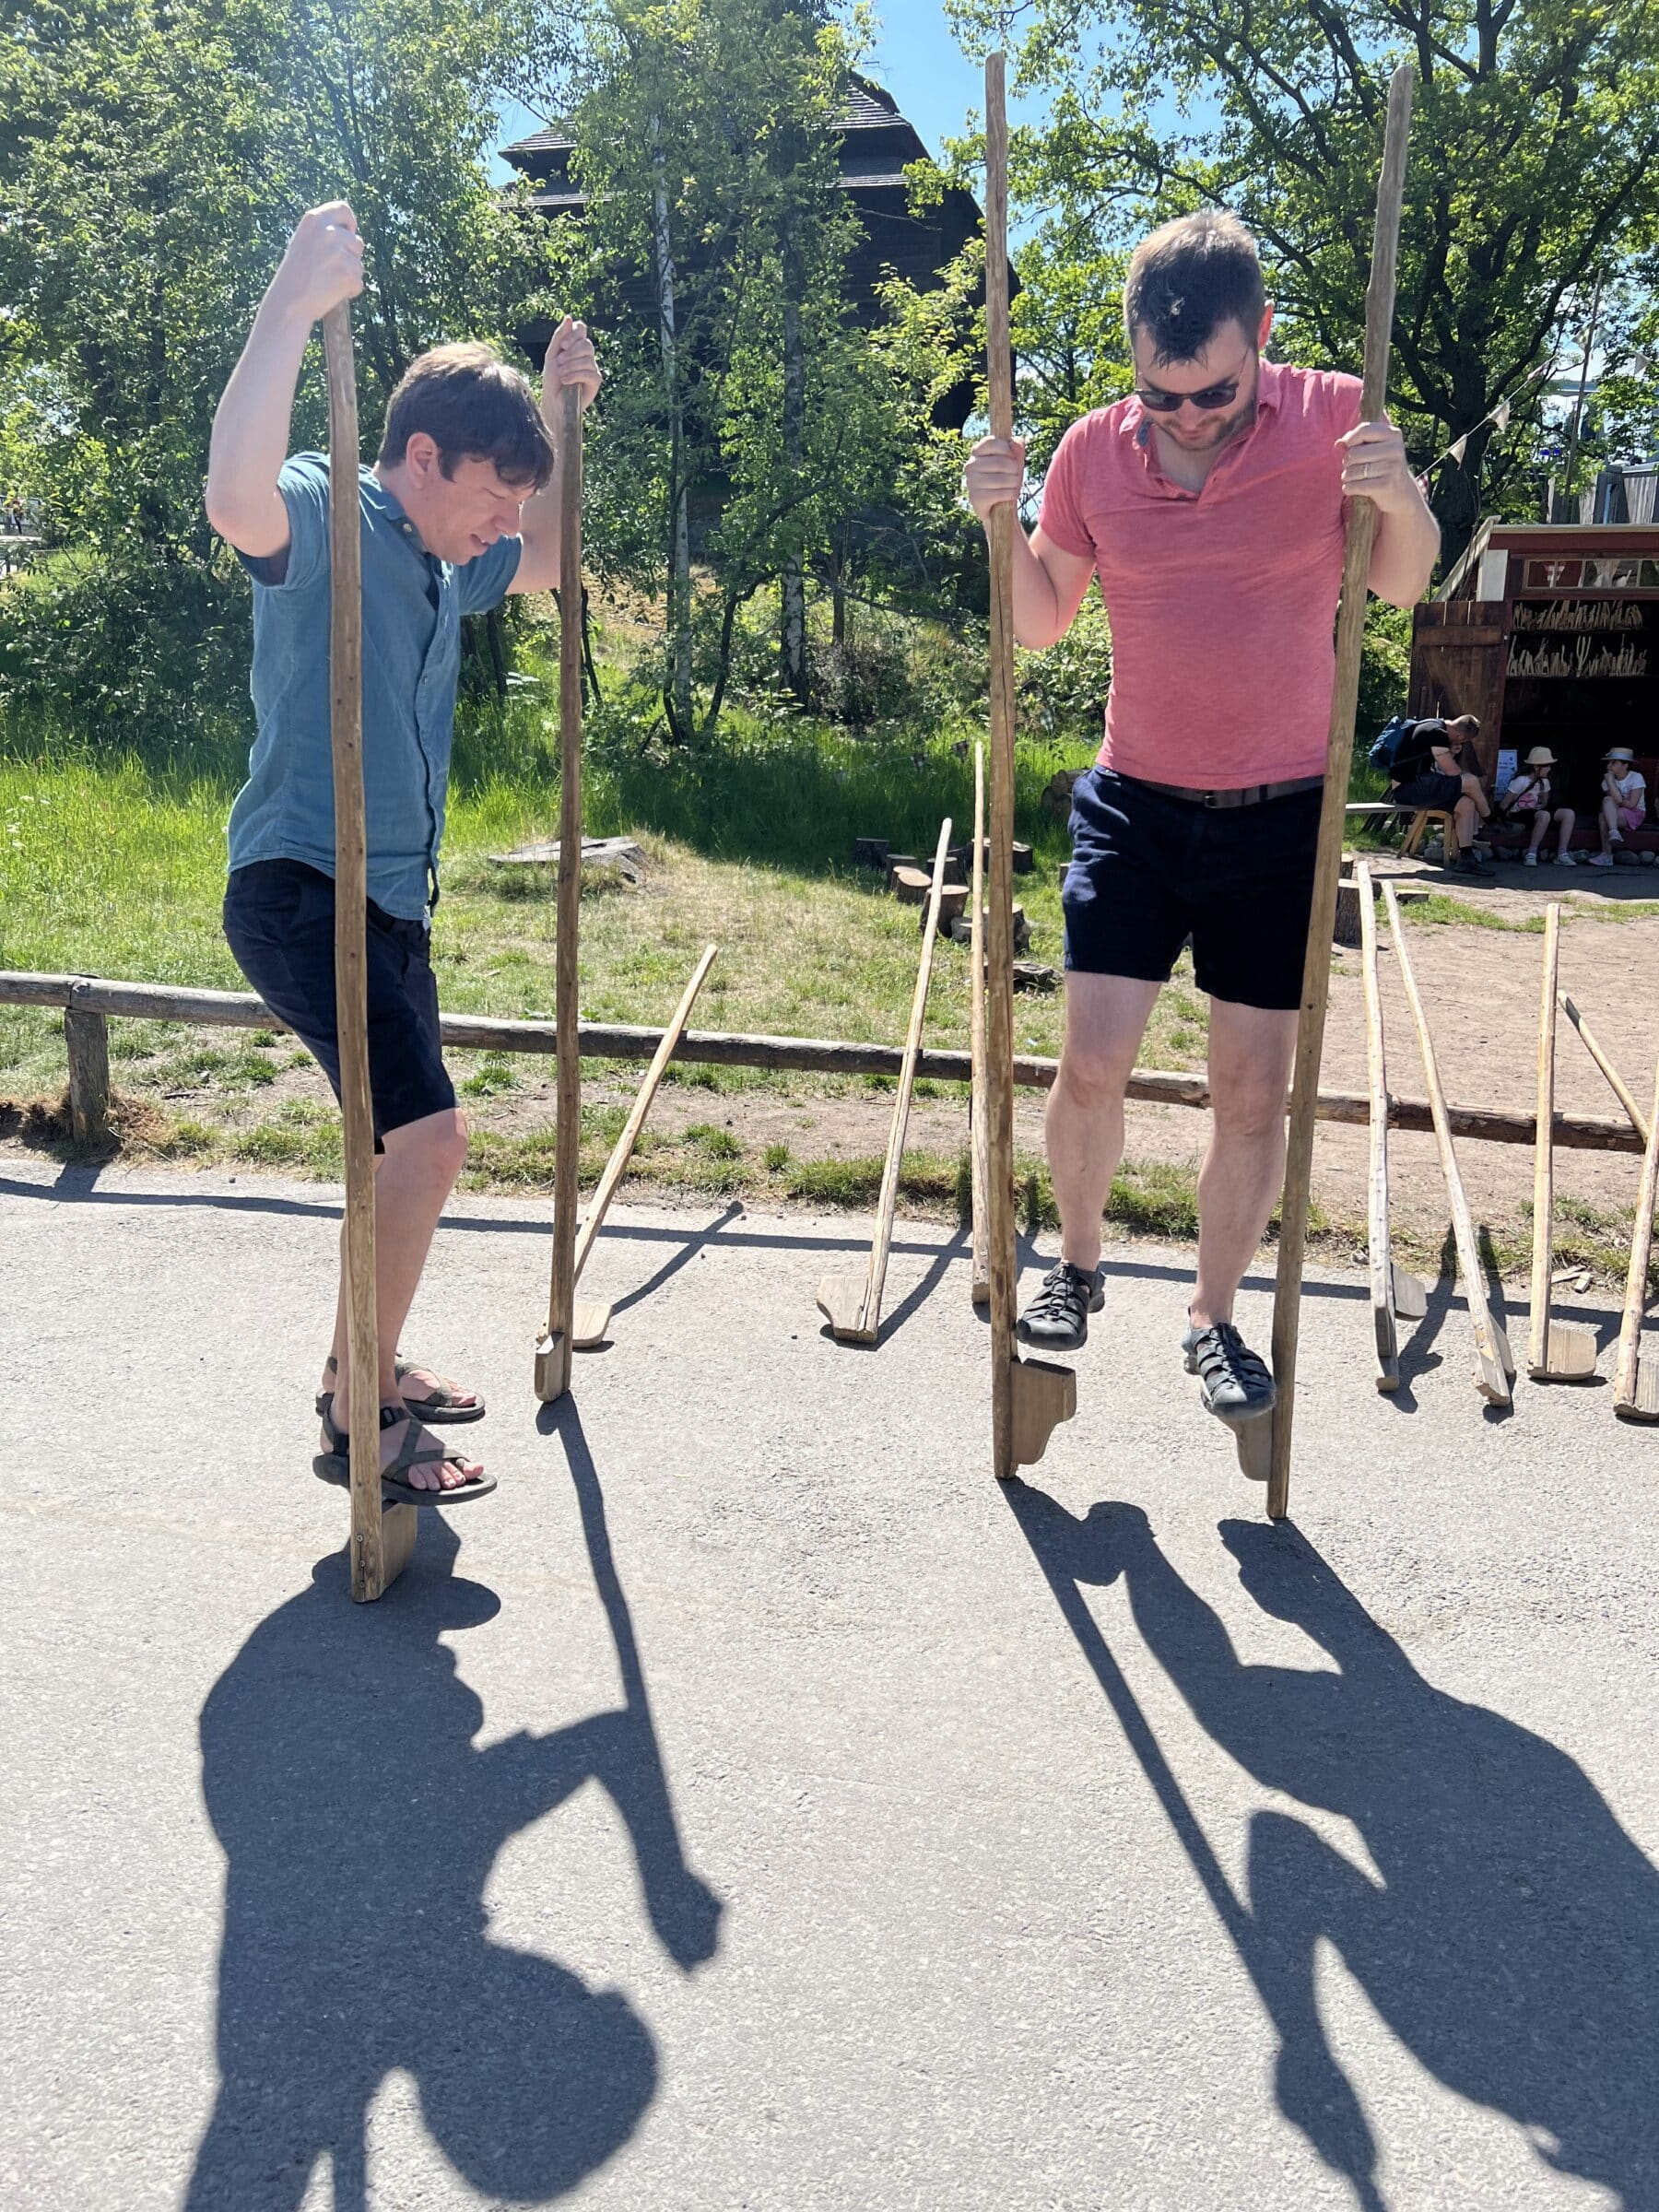 Trying out stilts at Skansen, before a passing stranger pointed out we had them backwards